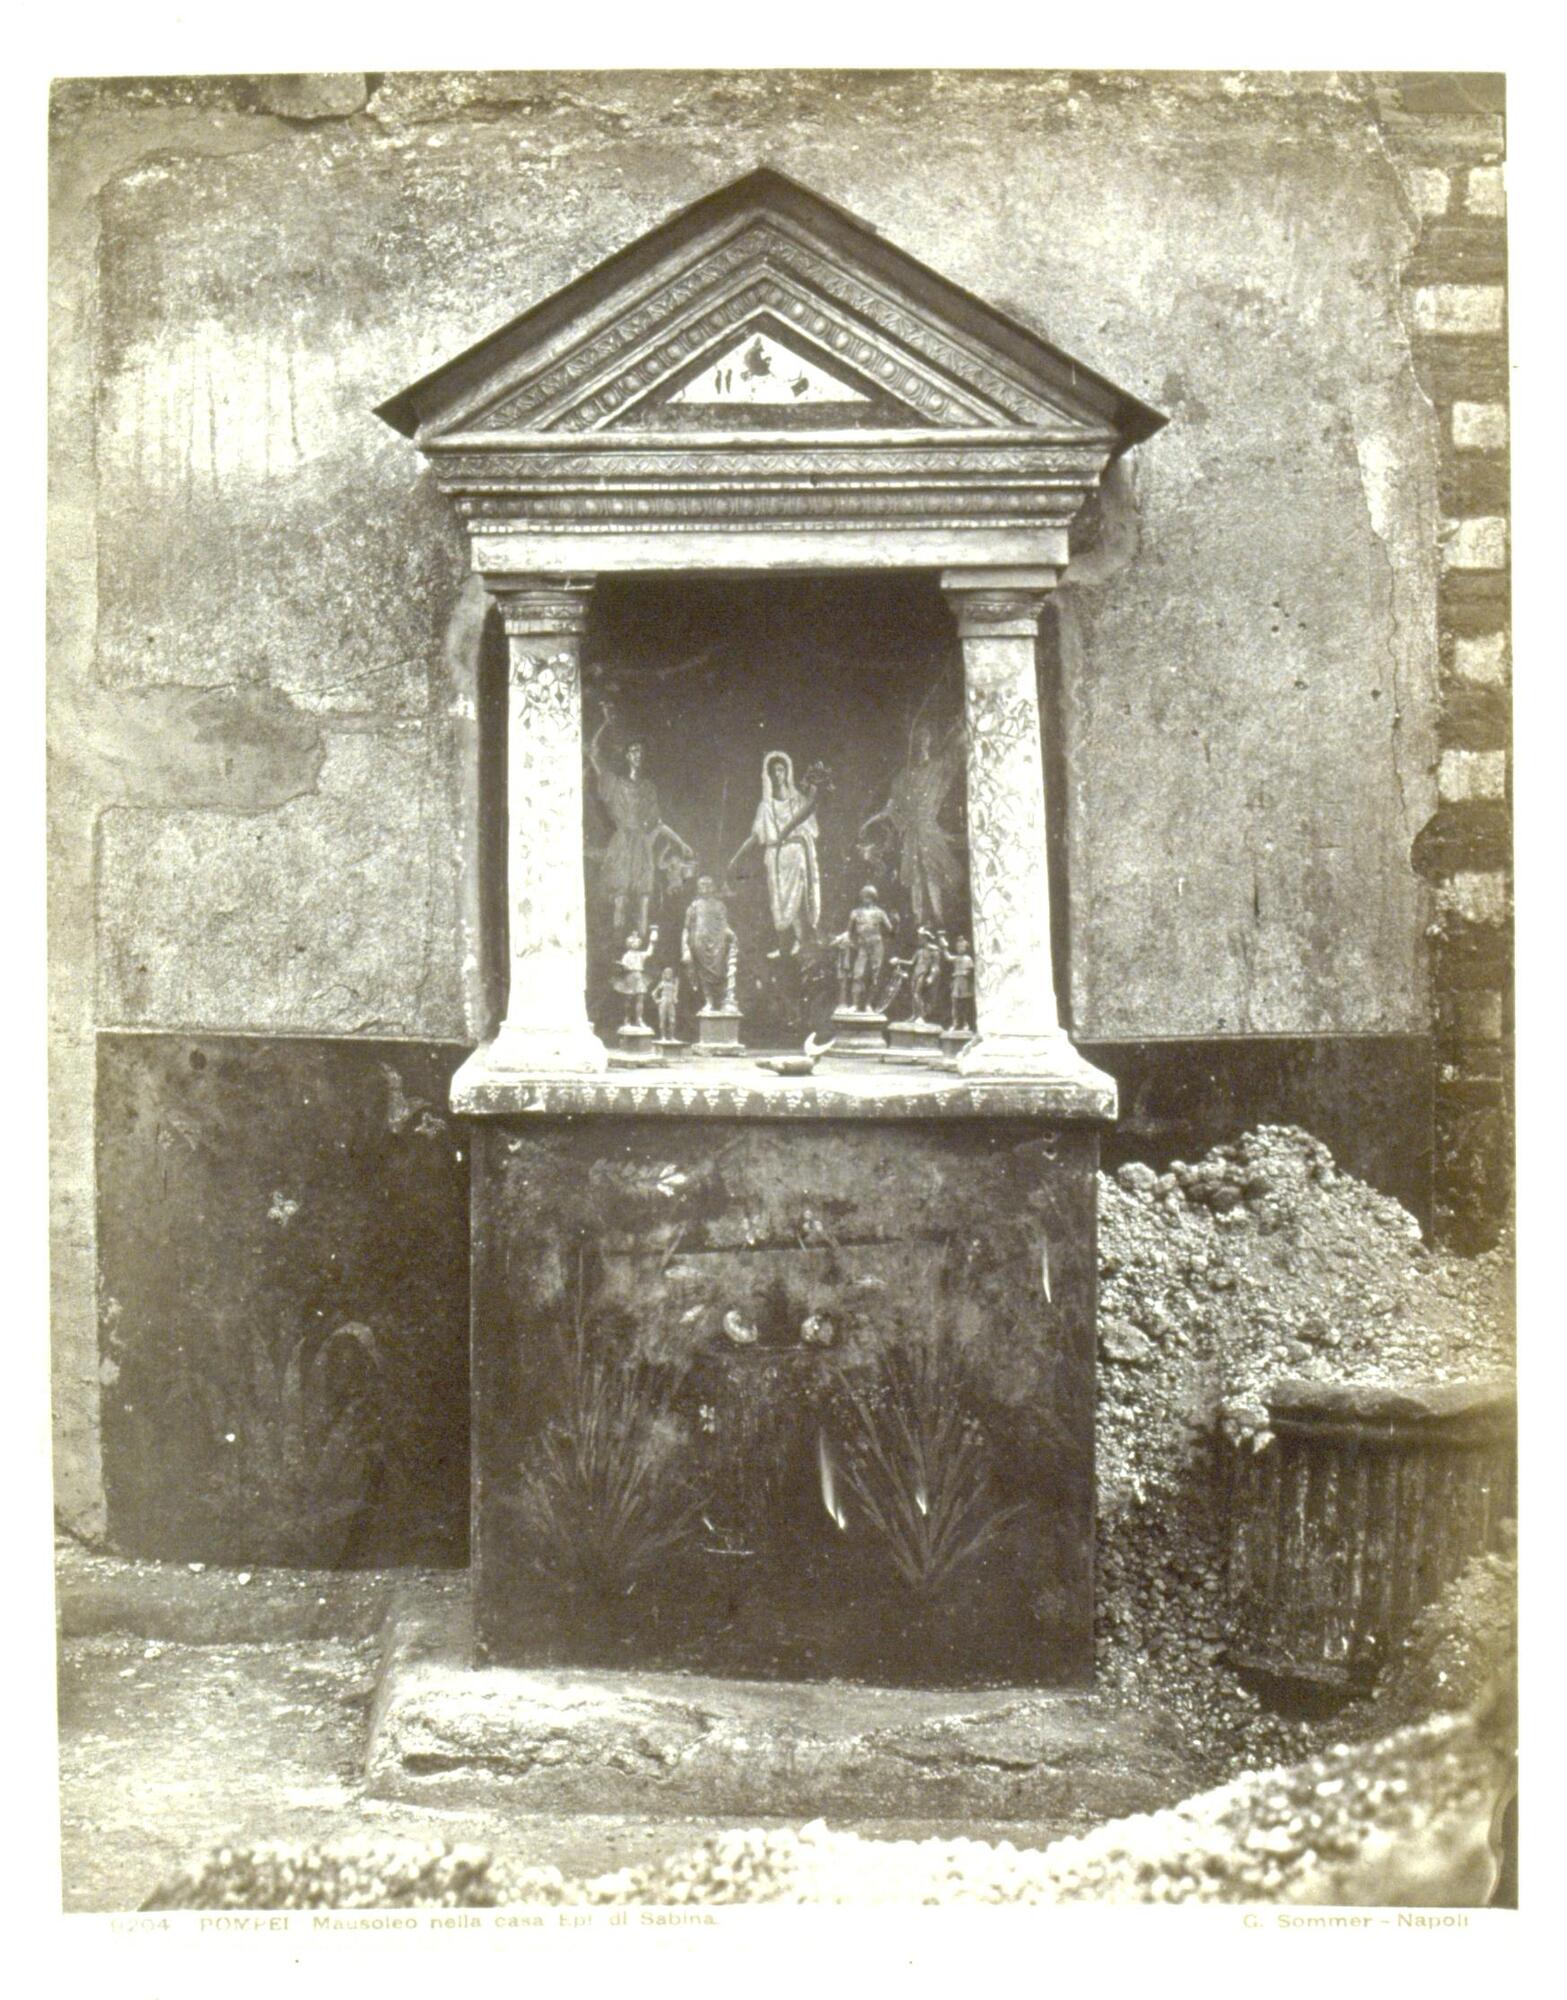 This photograph depicts a head-on view of an ancient Roman shrine.